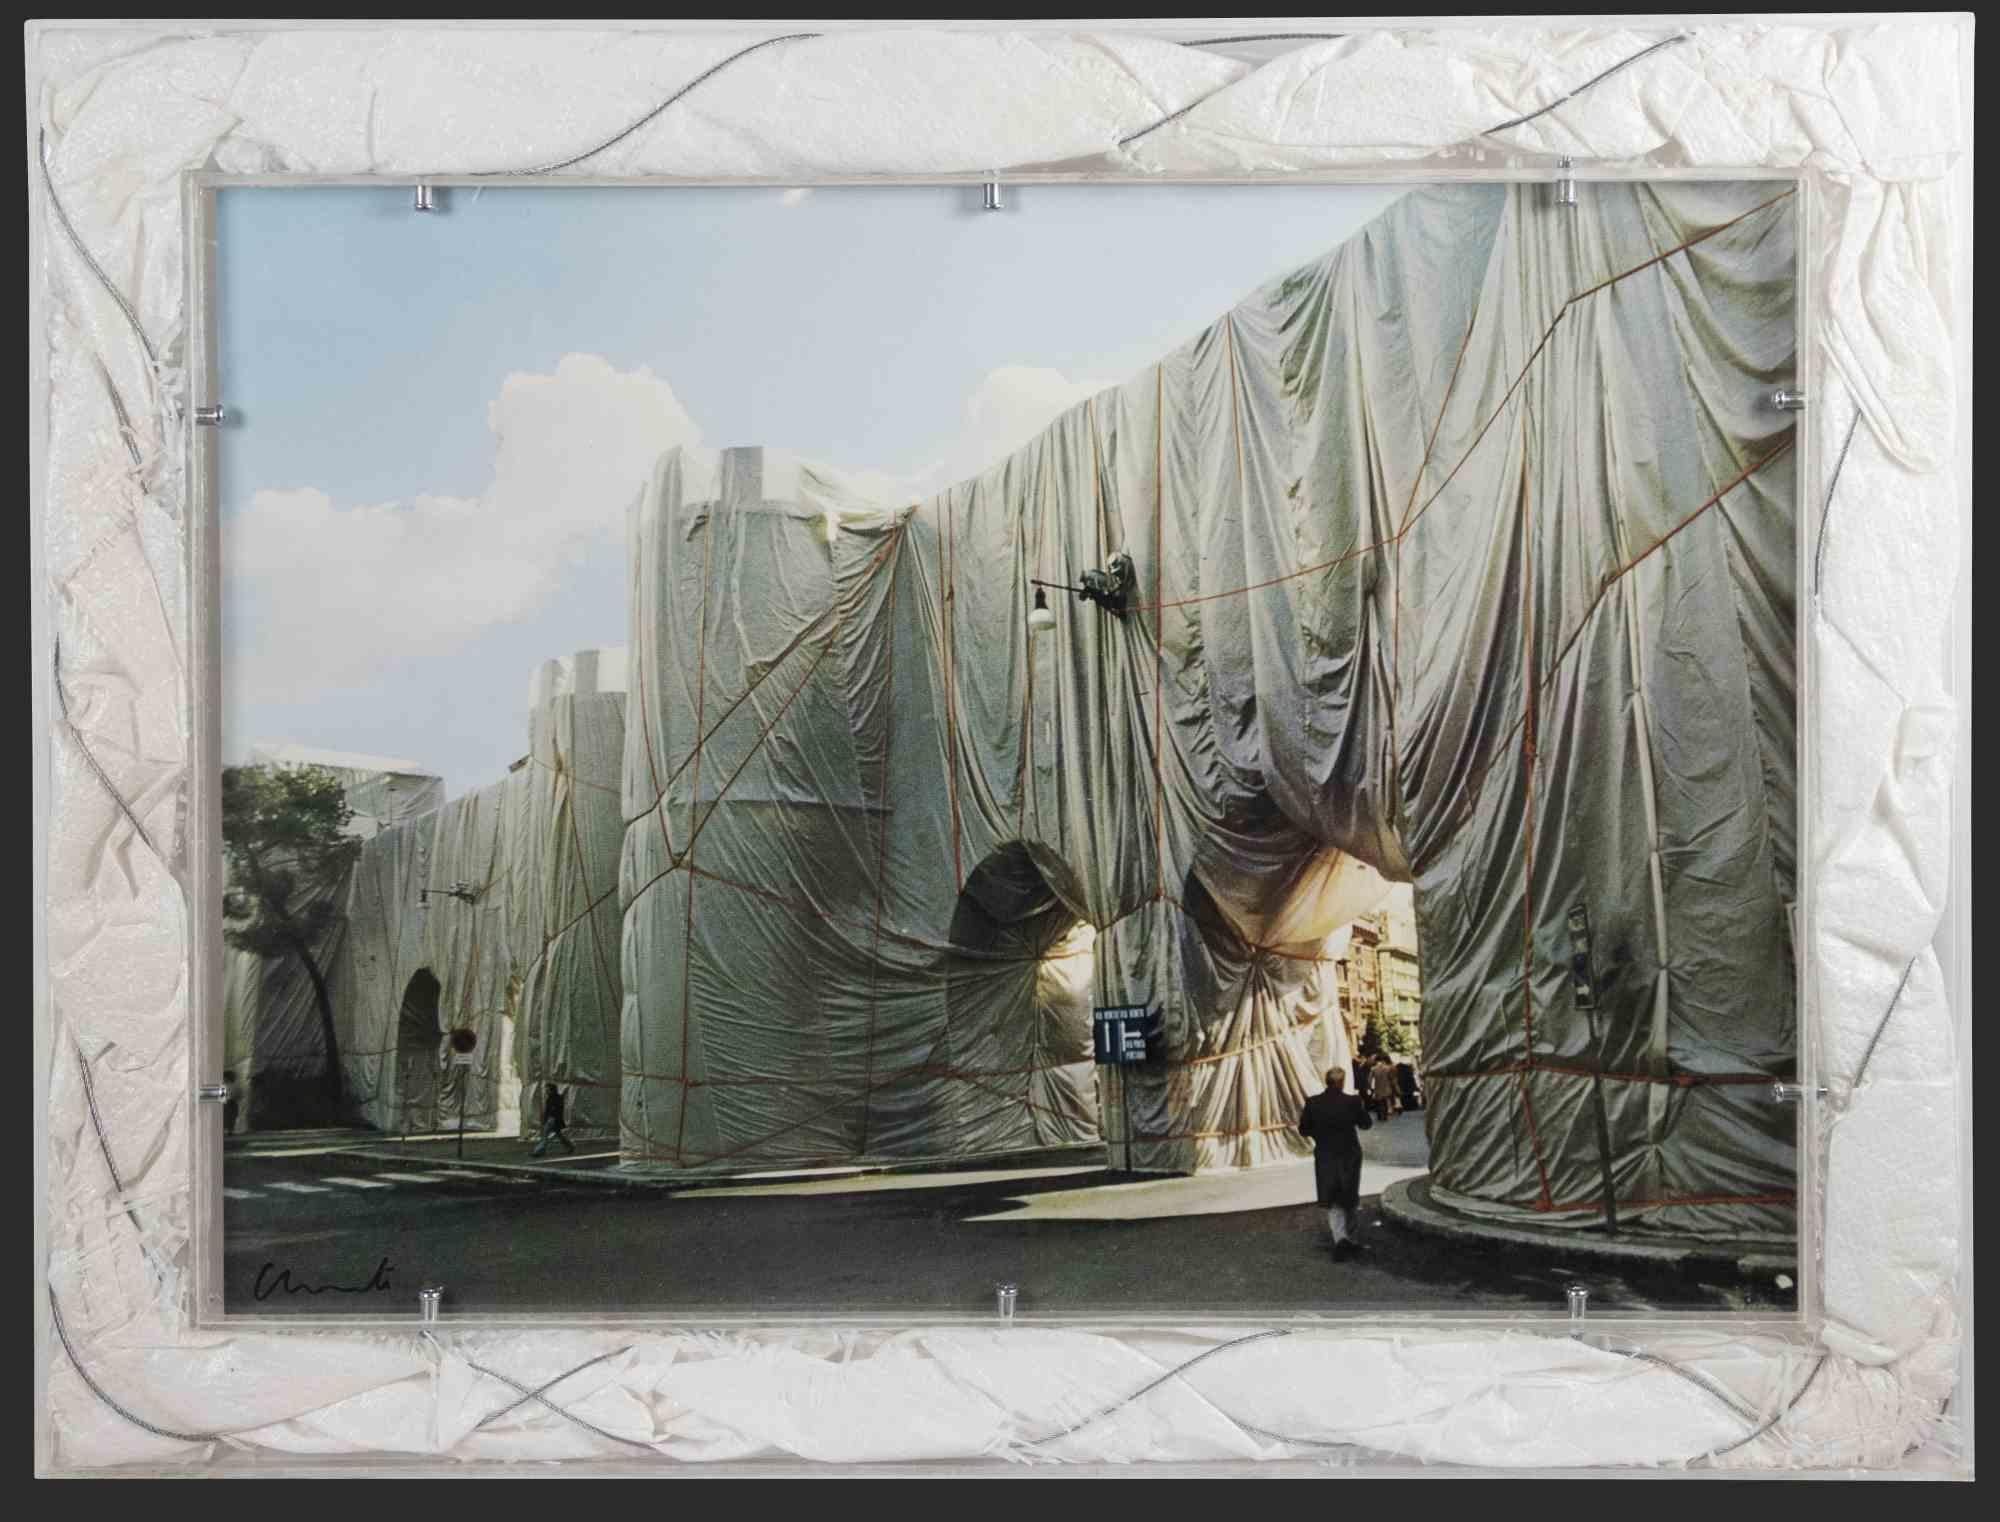 Christo and Jeanne-Claude Landscape Photograph - Wrapped Roman Wall - Photolithograph by Christo - 1974 ca.